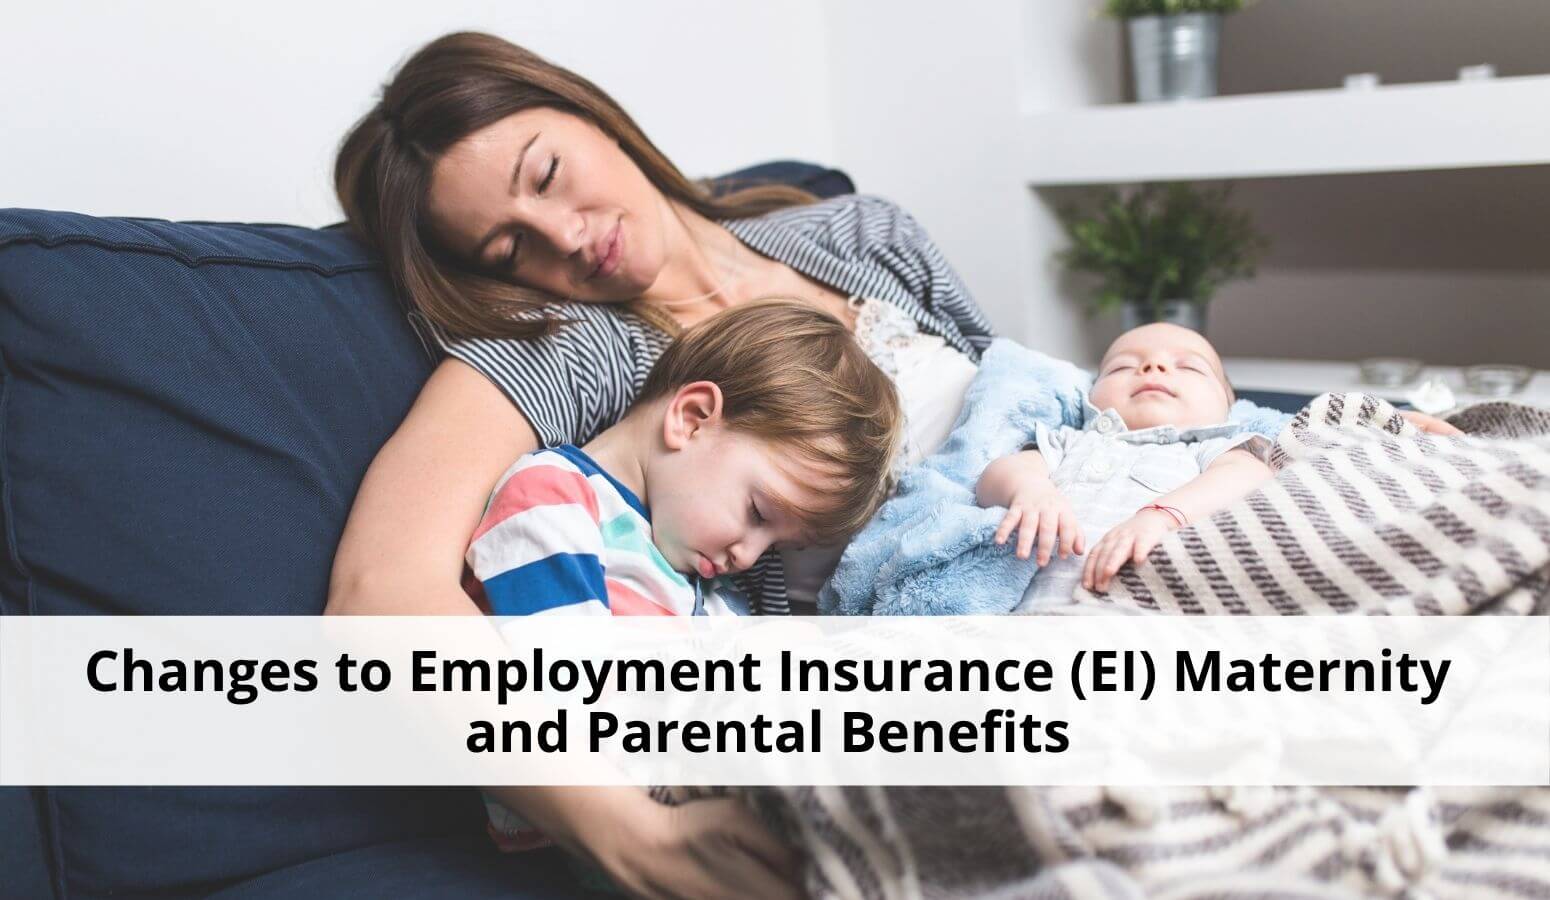 Featured image for “Changes to Employment Insurance (EI) Maternity and Parental Benefits”